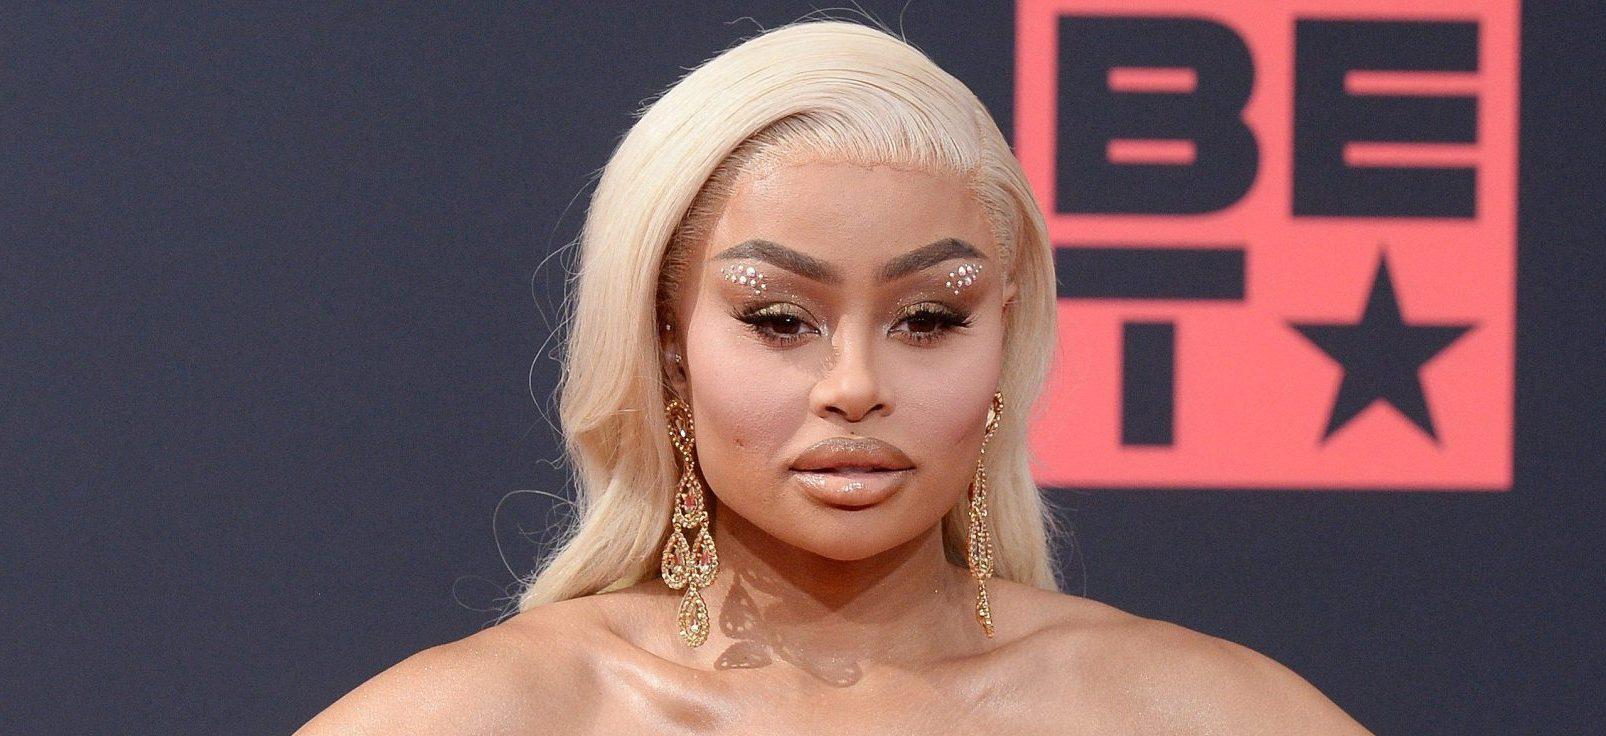 Blac Chyna Moves For More Reversal Of Her Cosmetic Surgery